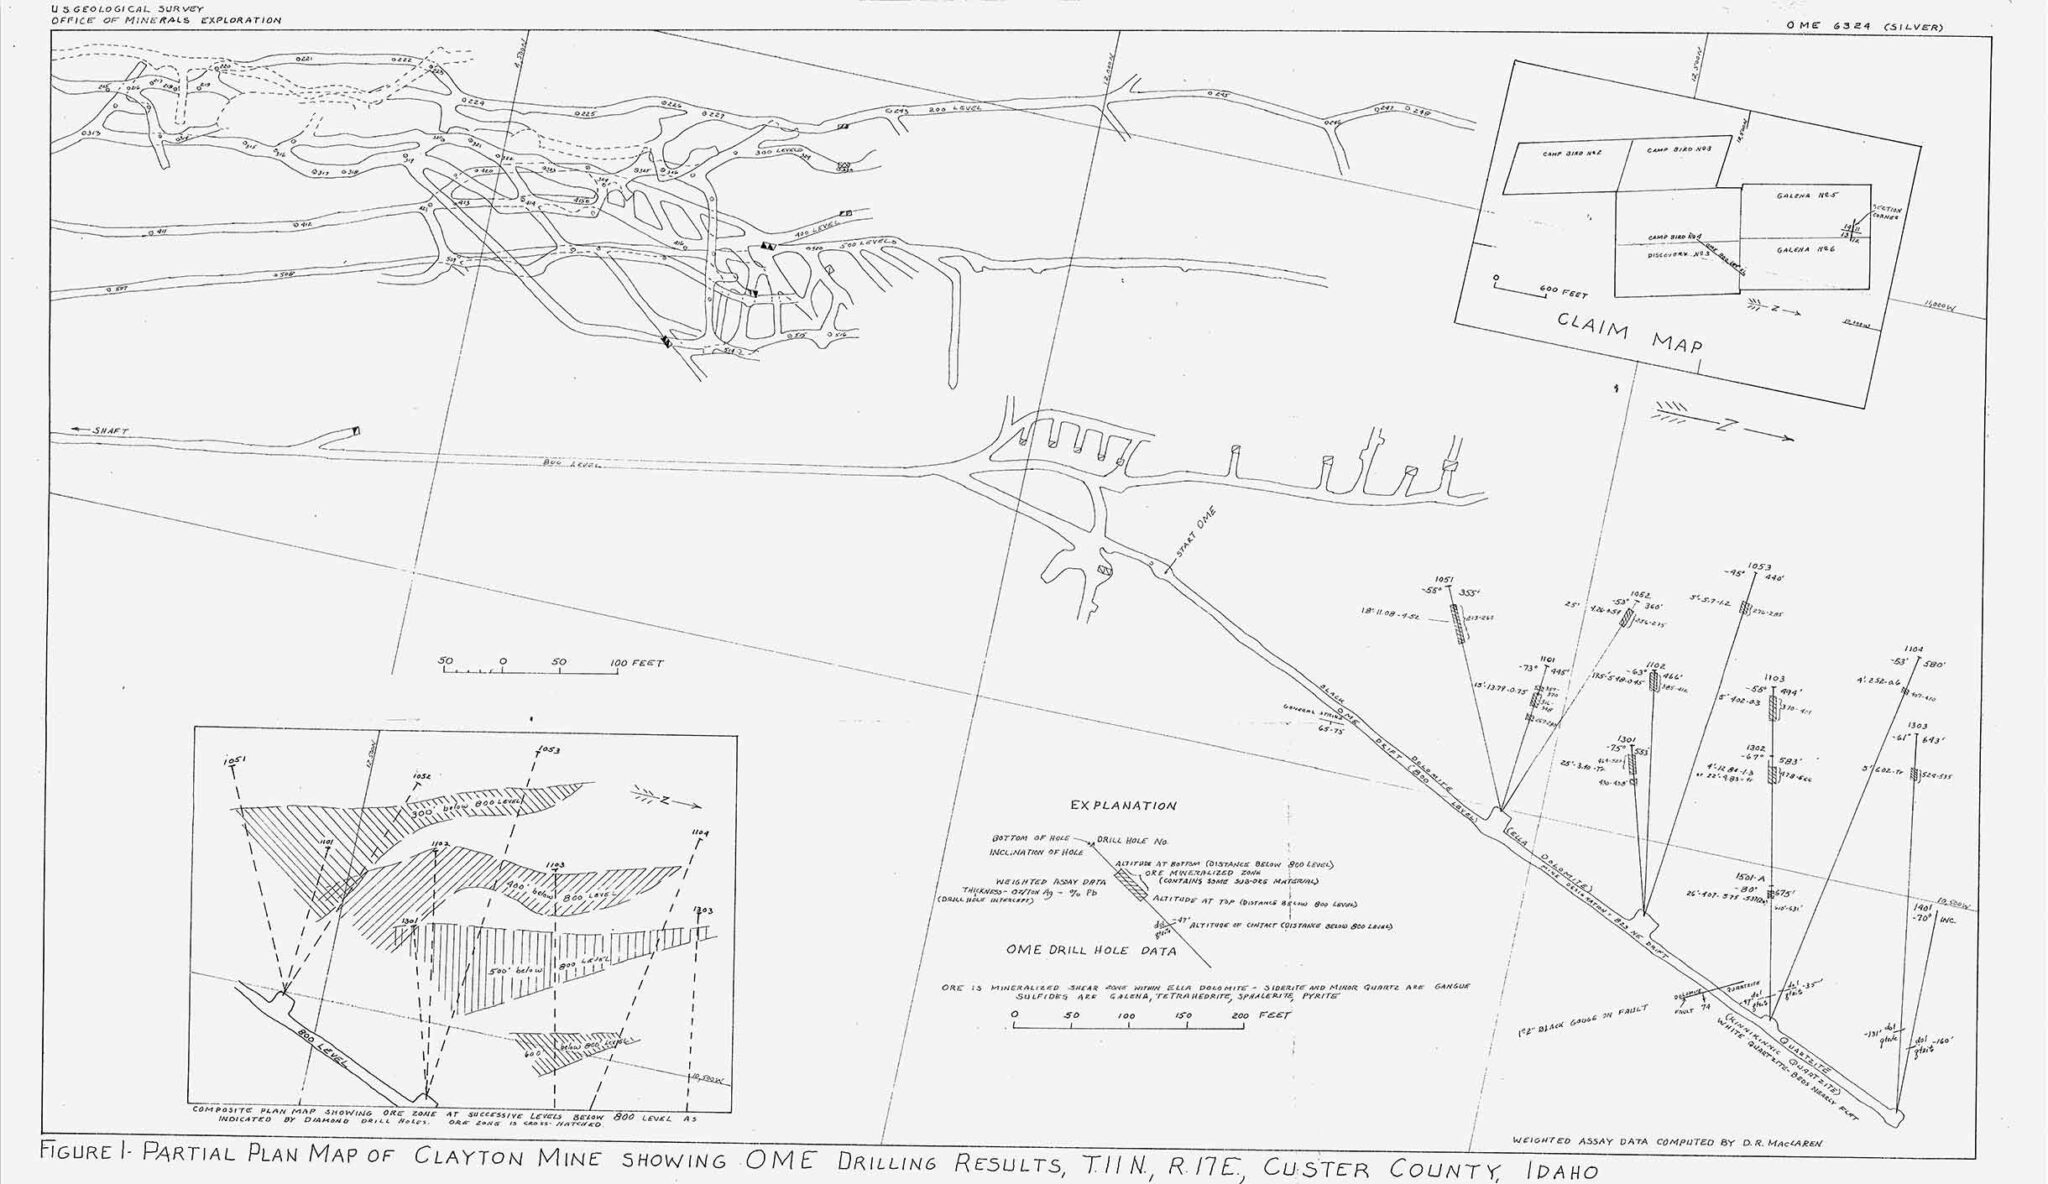 1964 and 1965 drillhole locations to explore the mineralization below the 800 ft. level of the Clayton Mine